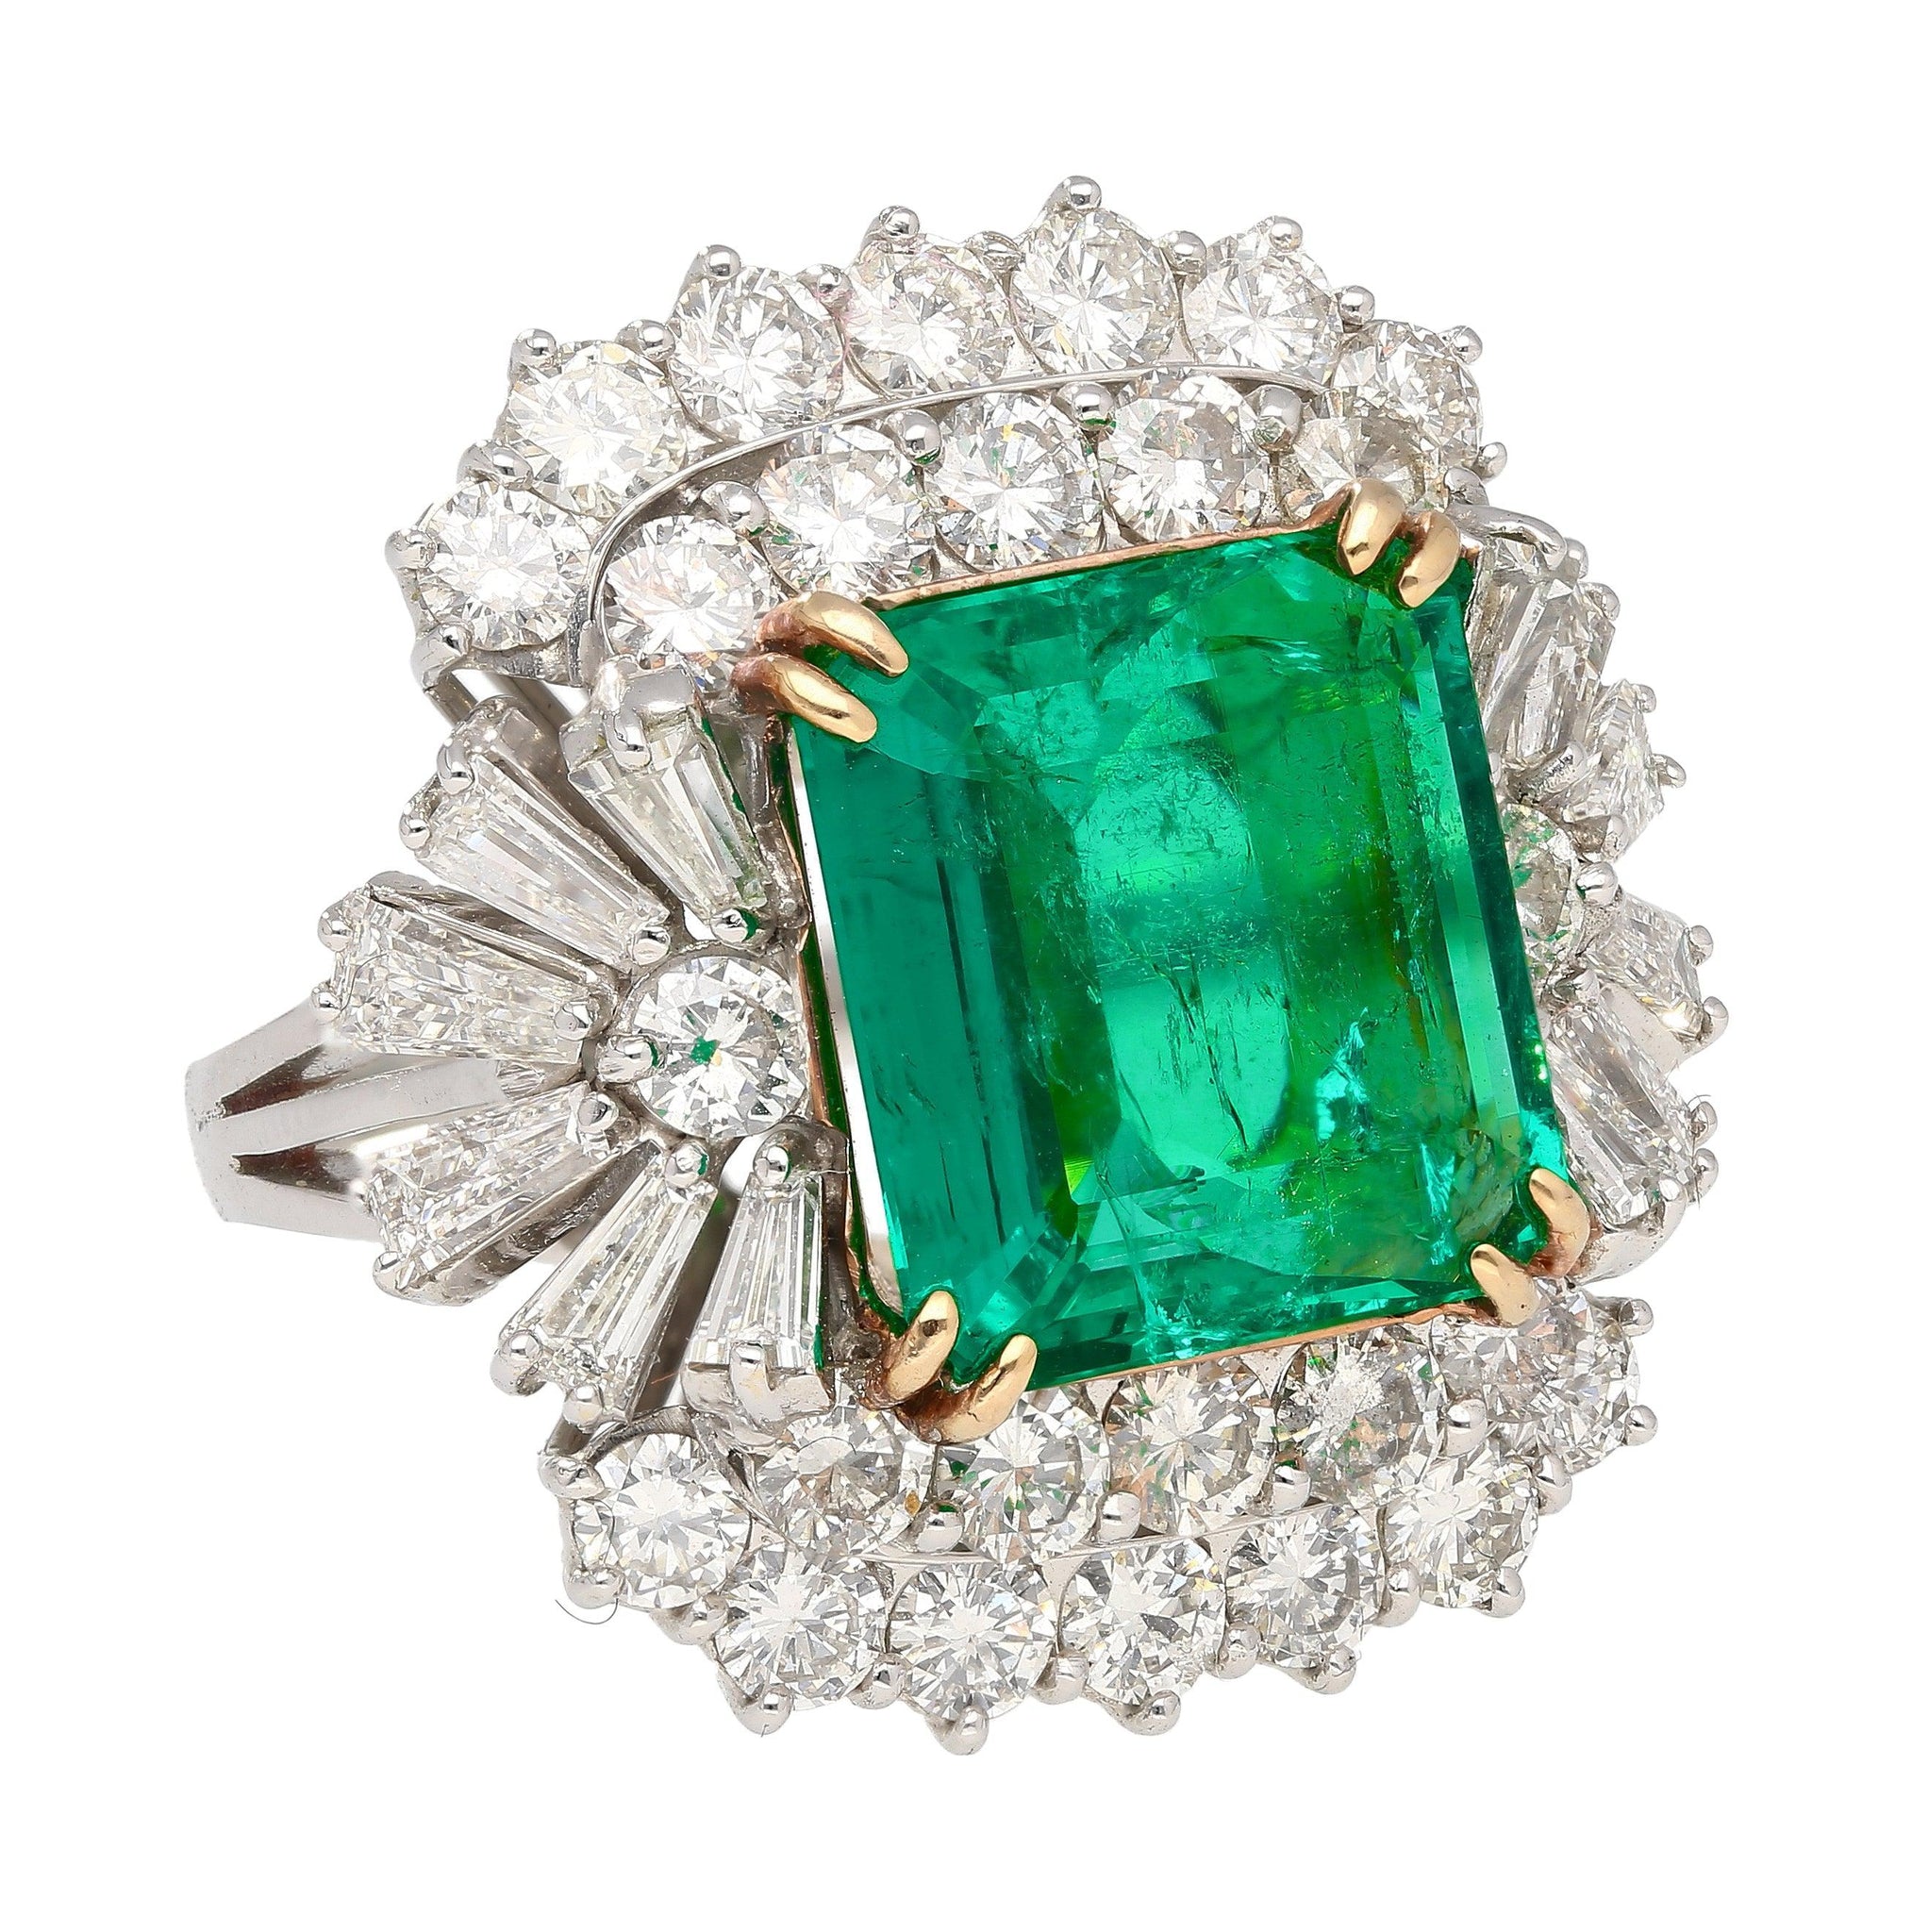 6.26 Carat Emerald Cut Emerald with Trillion and Round Cut Diamond Side Stone Ring in 18K White, Yellow Gold